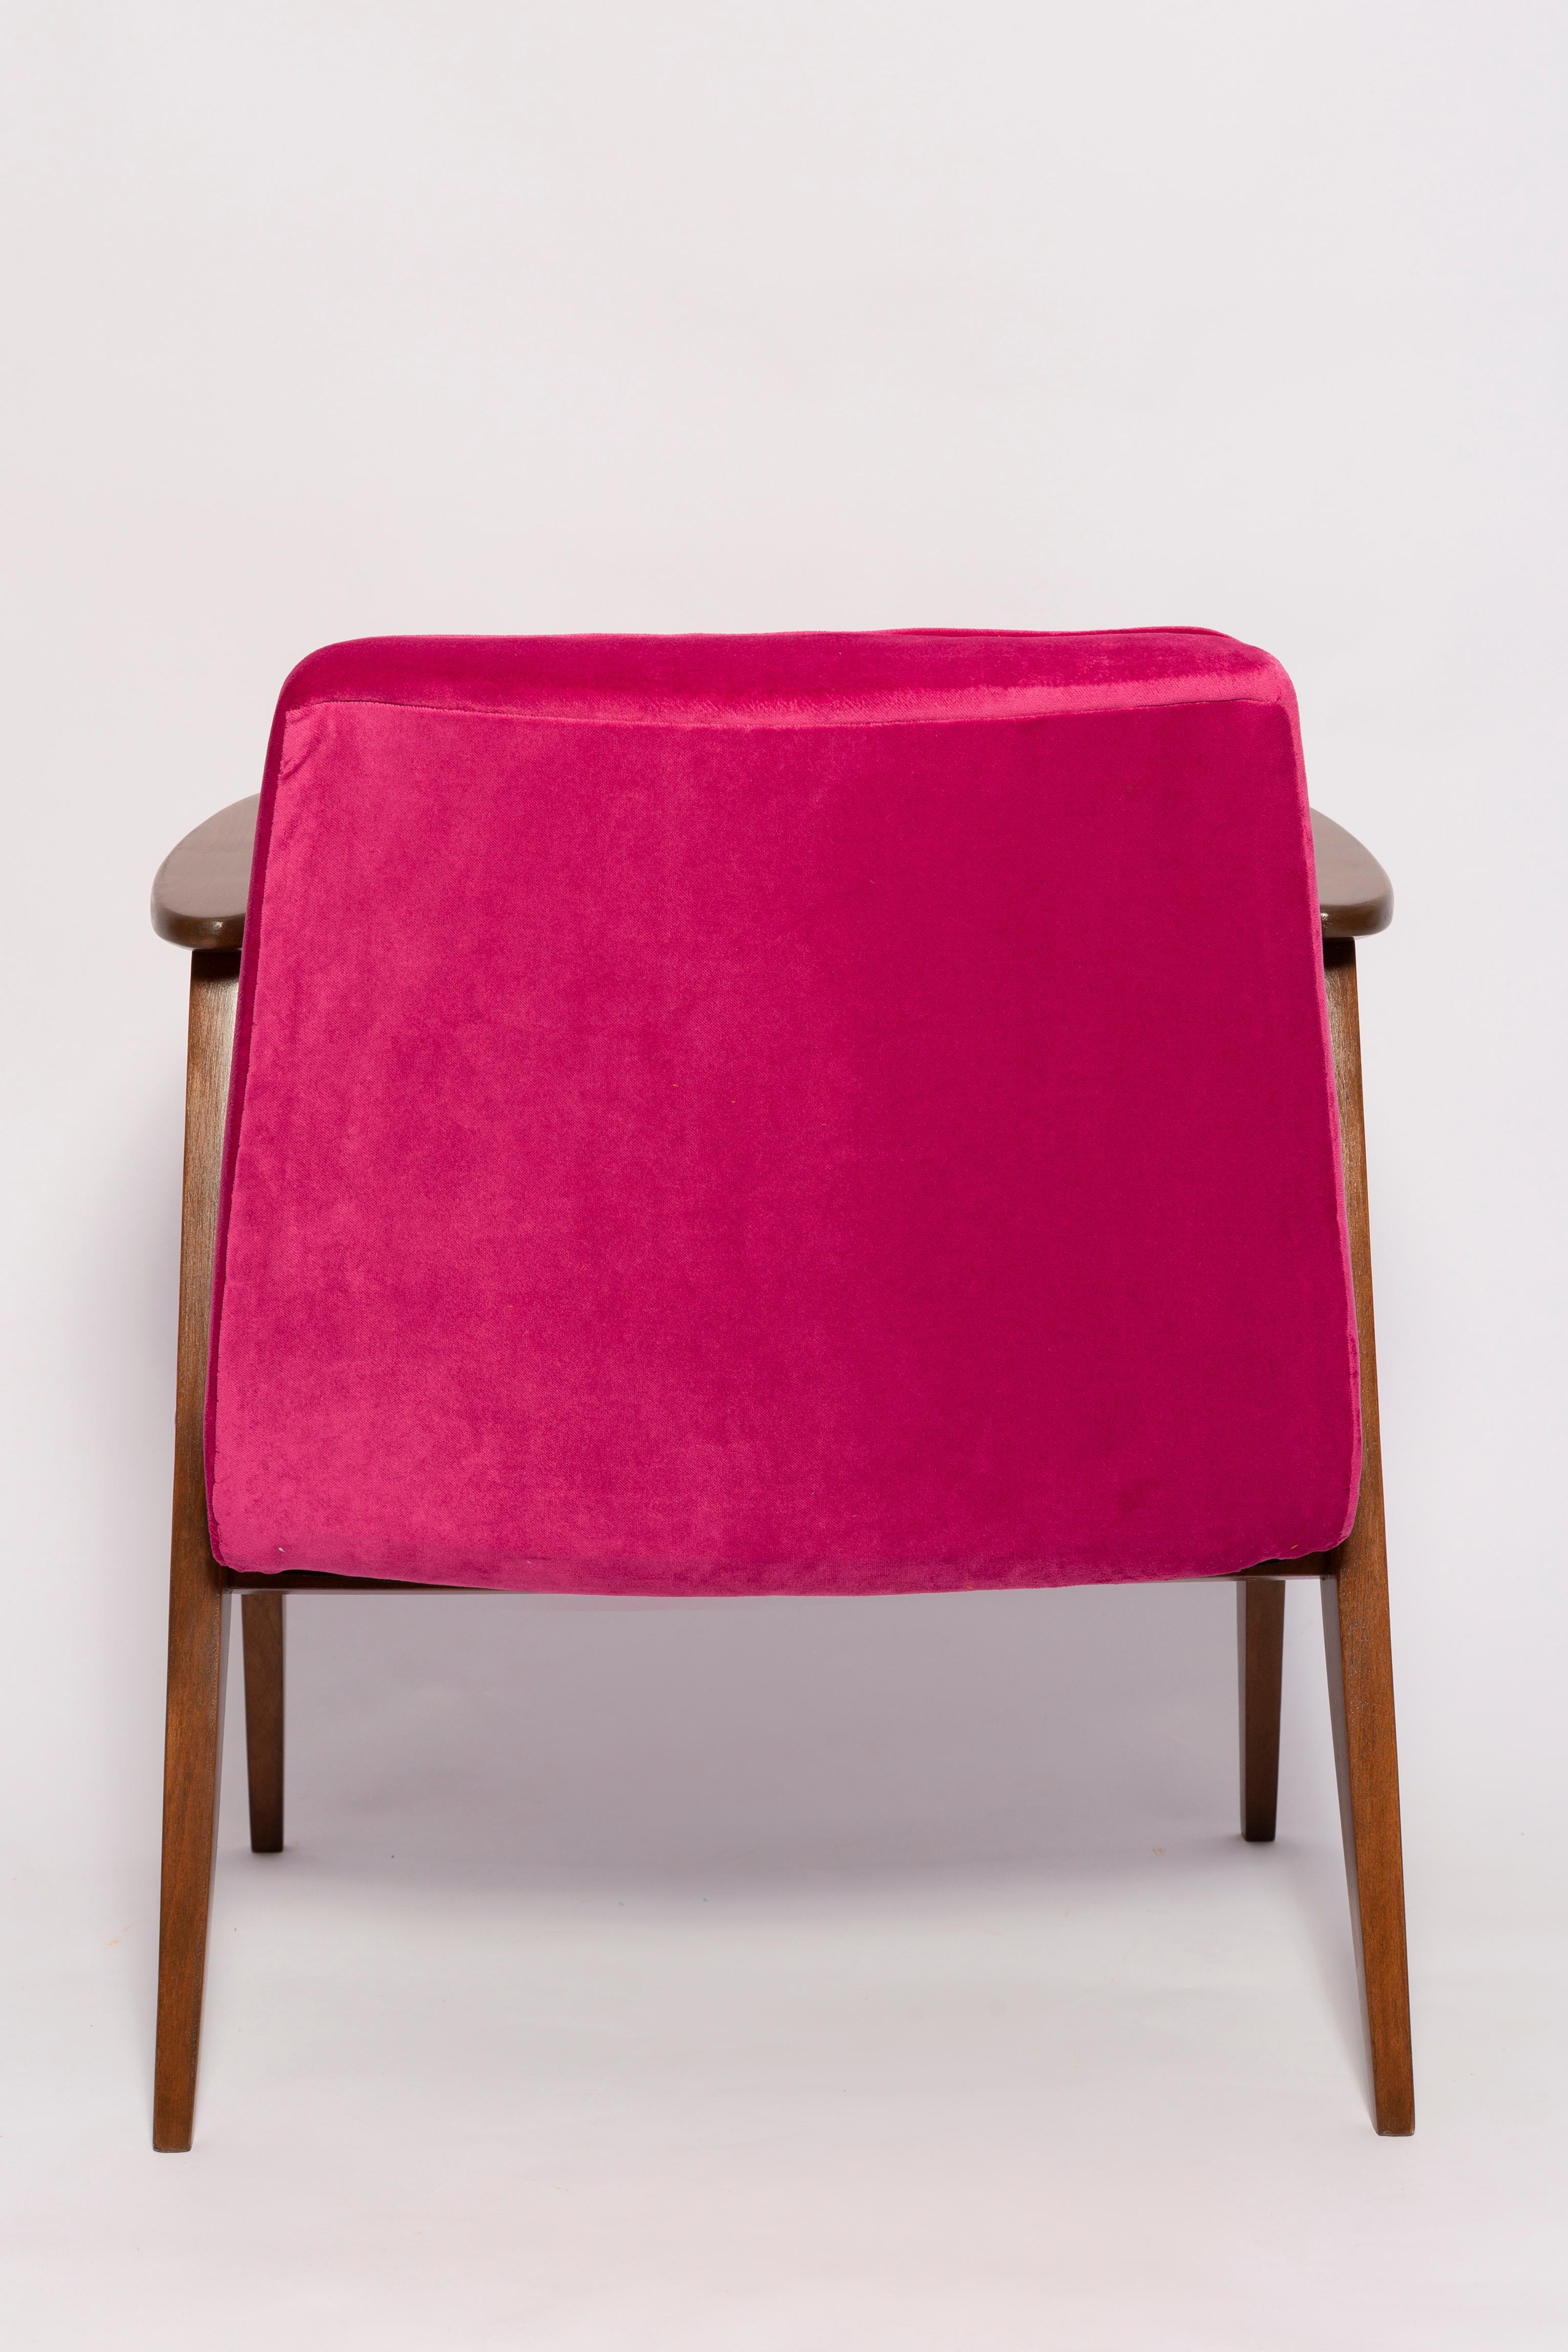 Pair of Mid Century 366 Armchairs in Pink Velvet, Jozef Chierowski, Europe 1960 For Sale 2